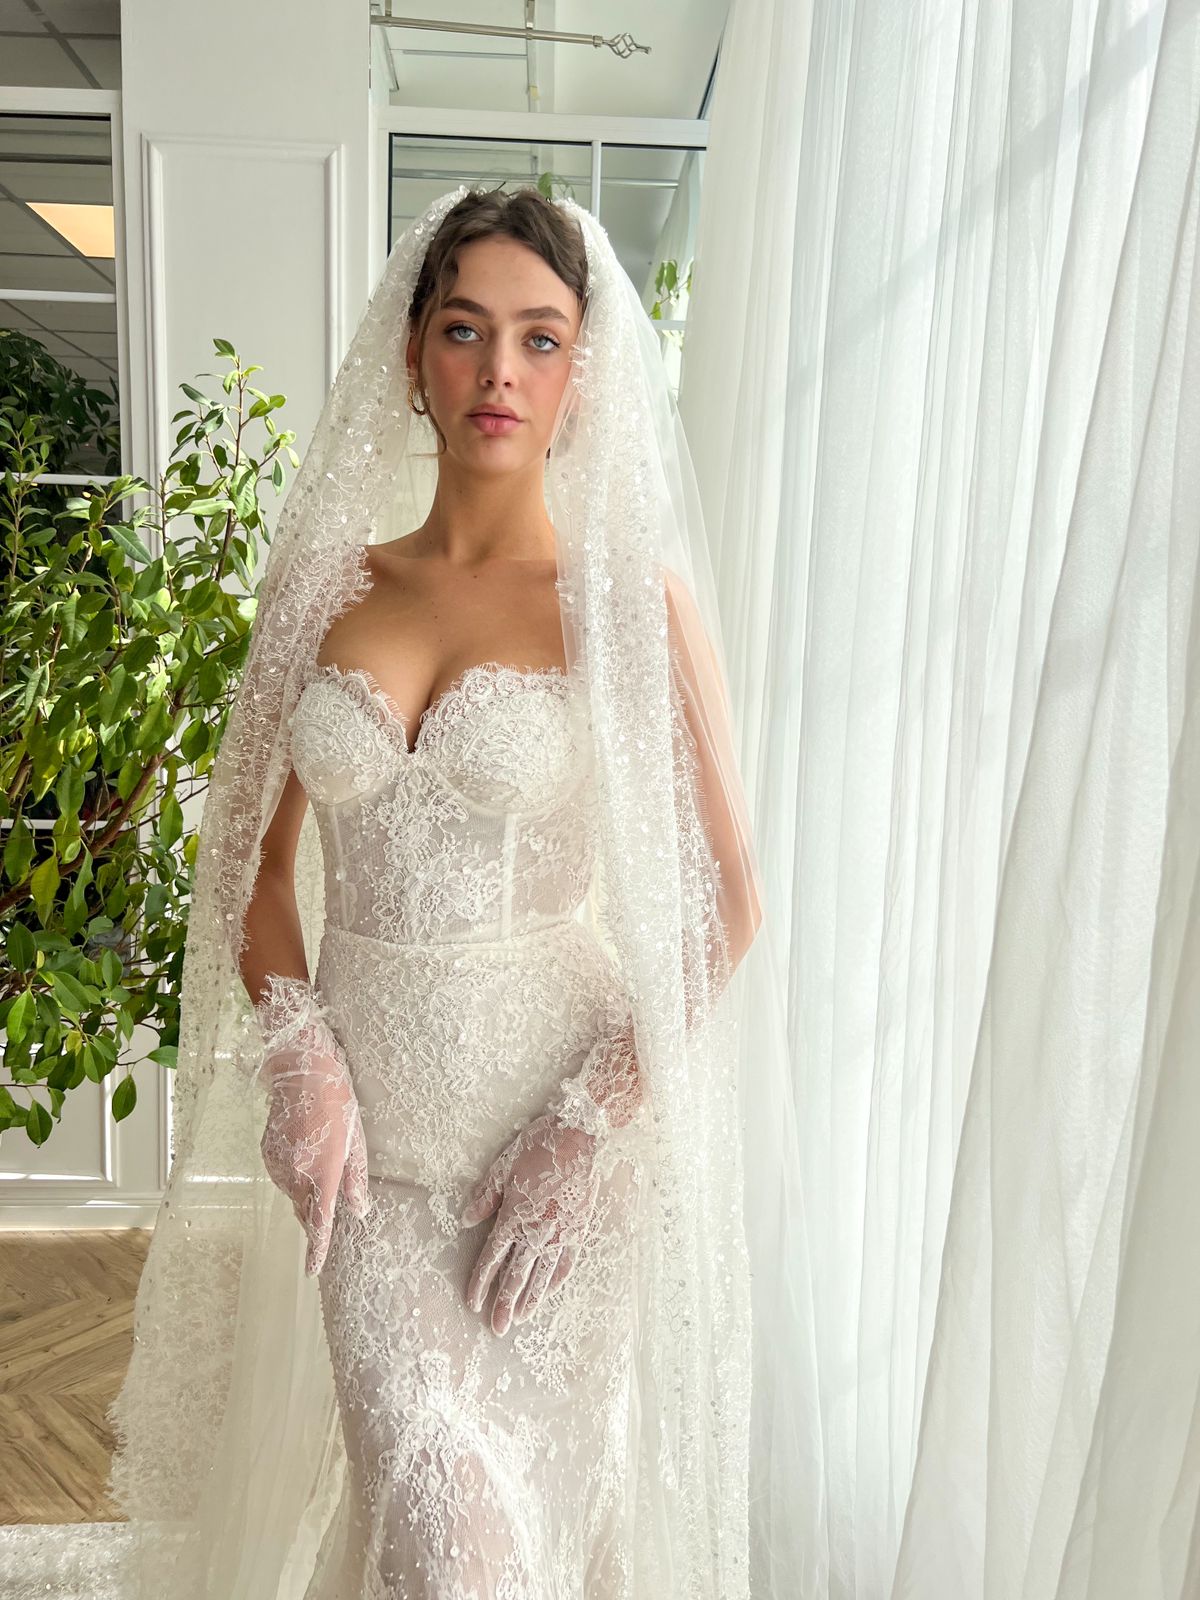 White mermaid bridal dress with veil, gloves and embroidery